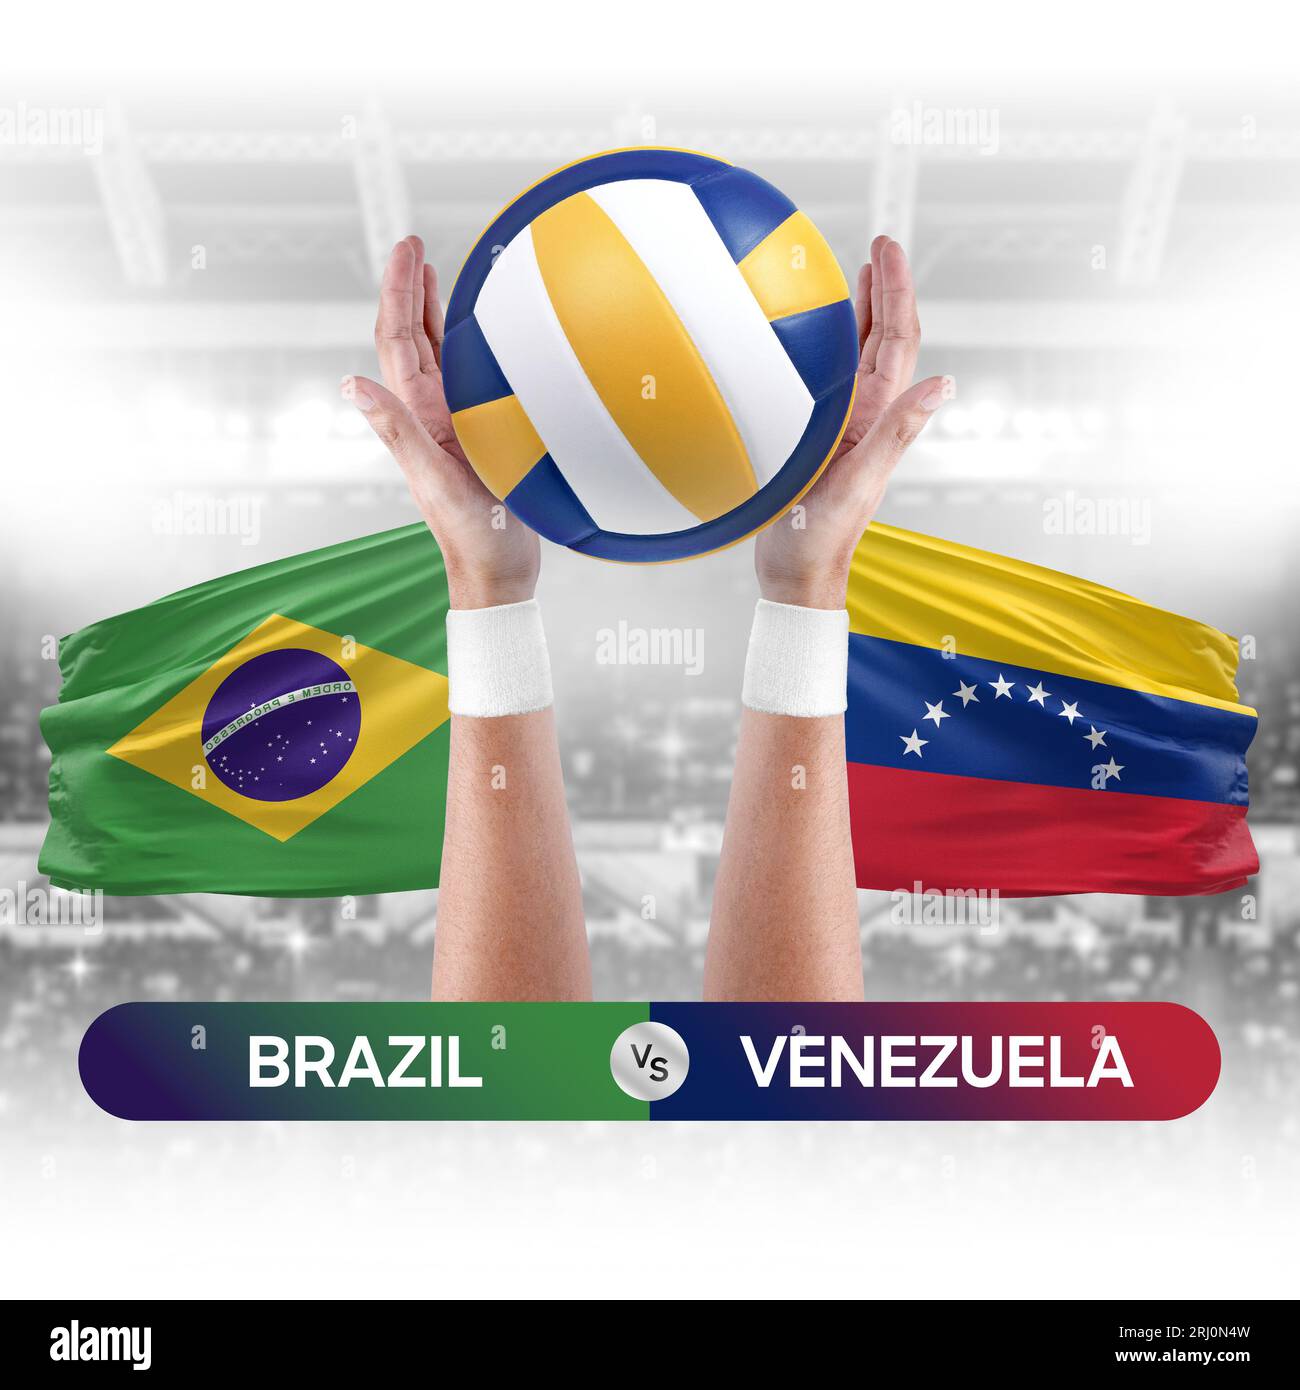 Brazil vs Venezuela national teams volleyball volley ball match competition concept. Stock Photo